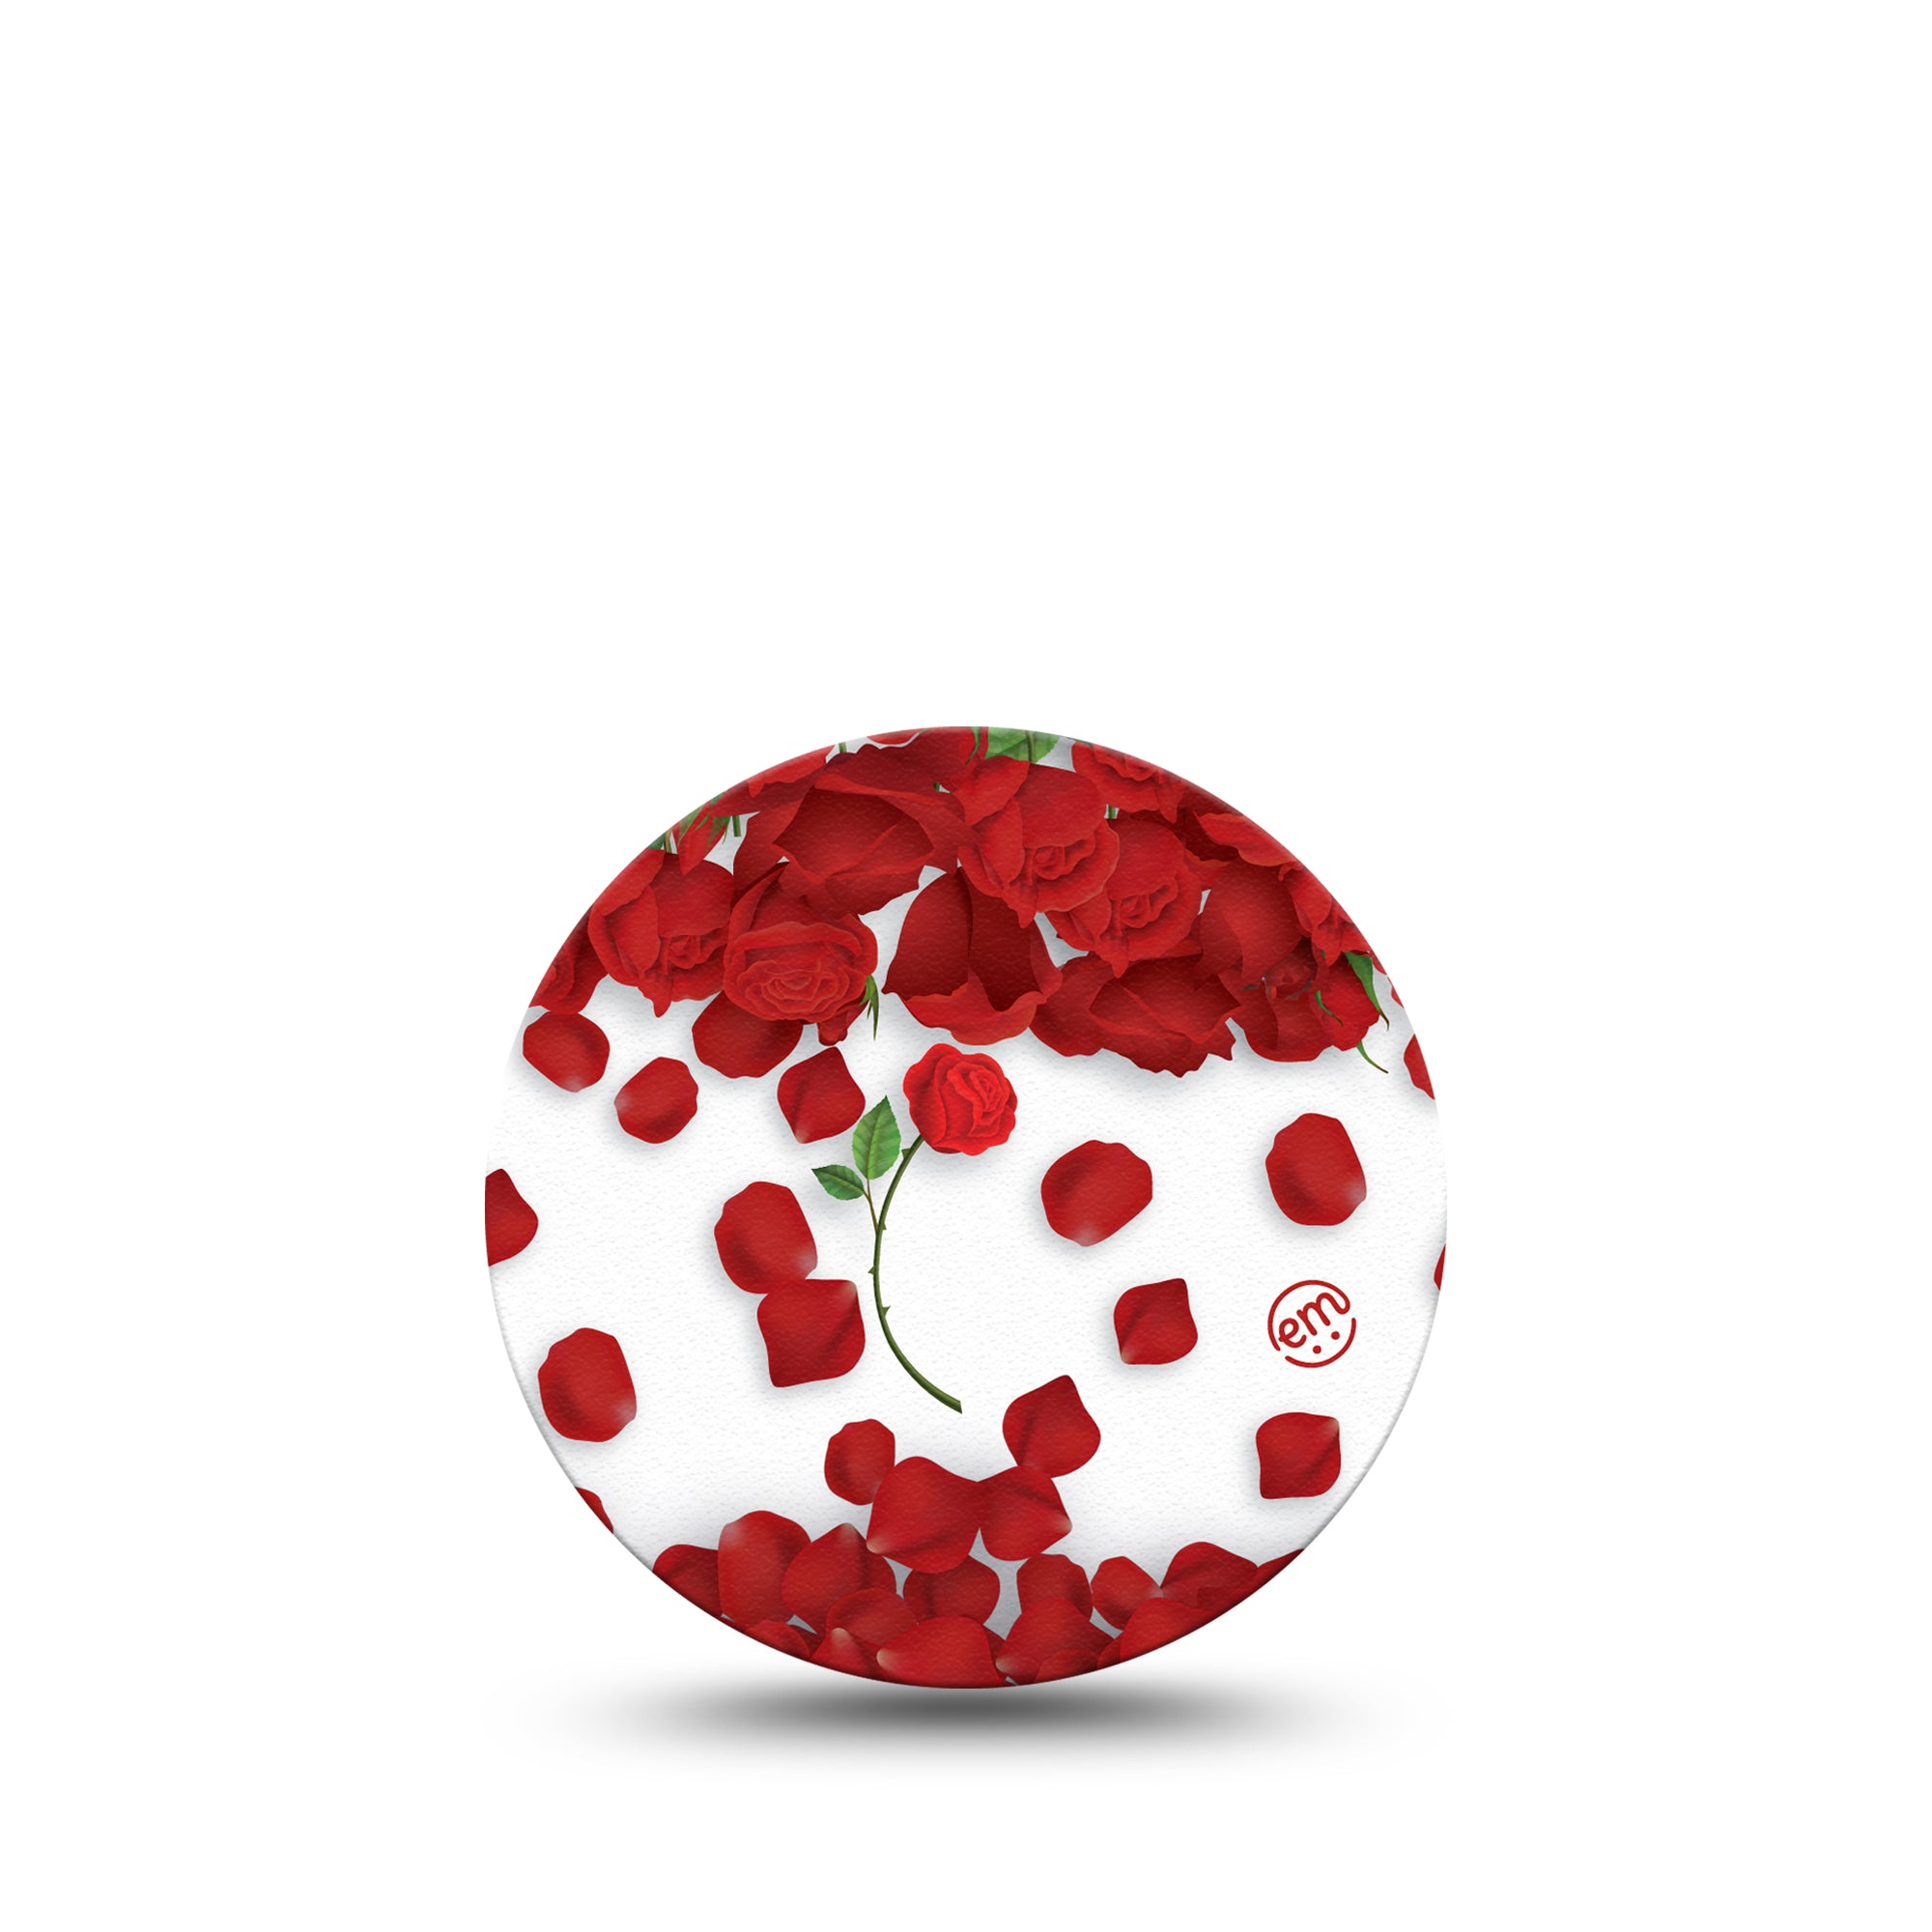 ExpressionMed Rose Petals Libre 3 Overpatch, Bed Of Roses Themed, CGM Adhesive Tape Design